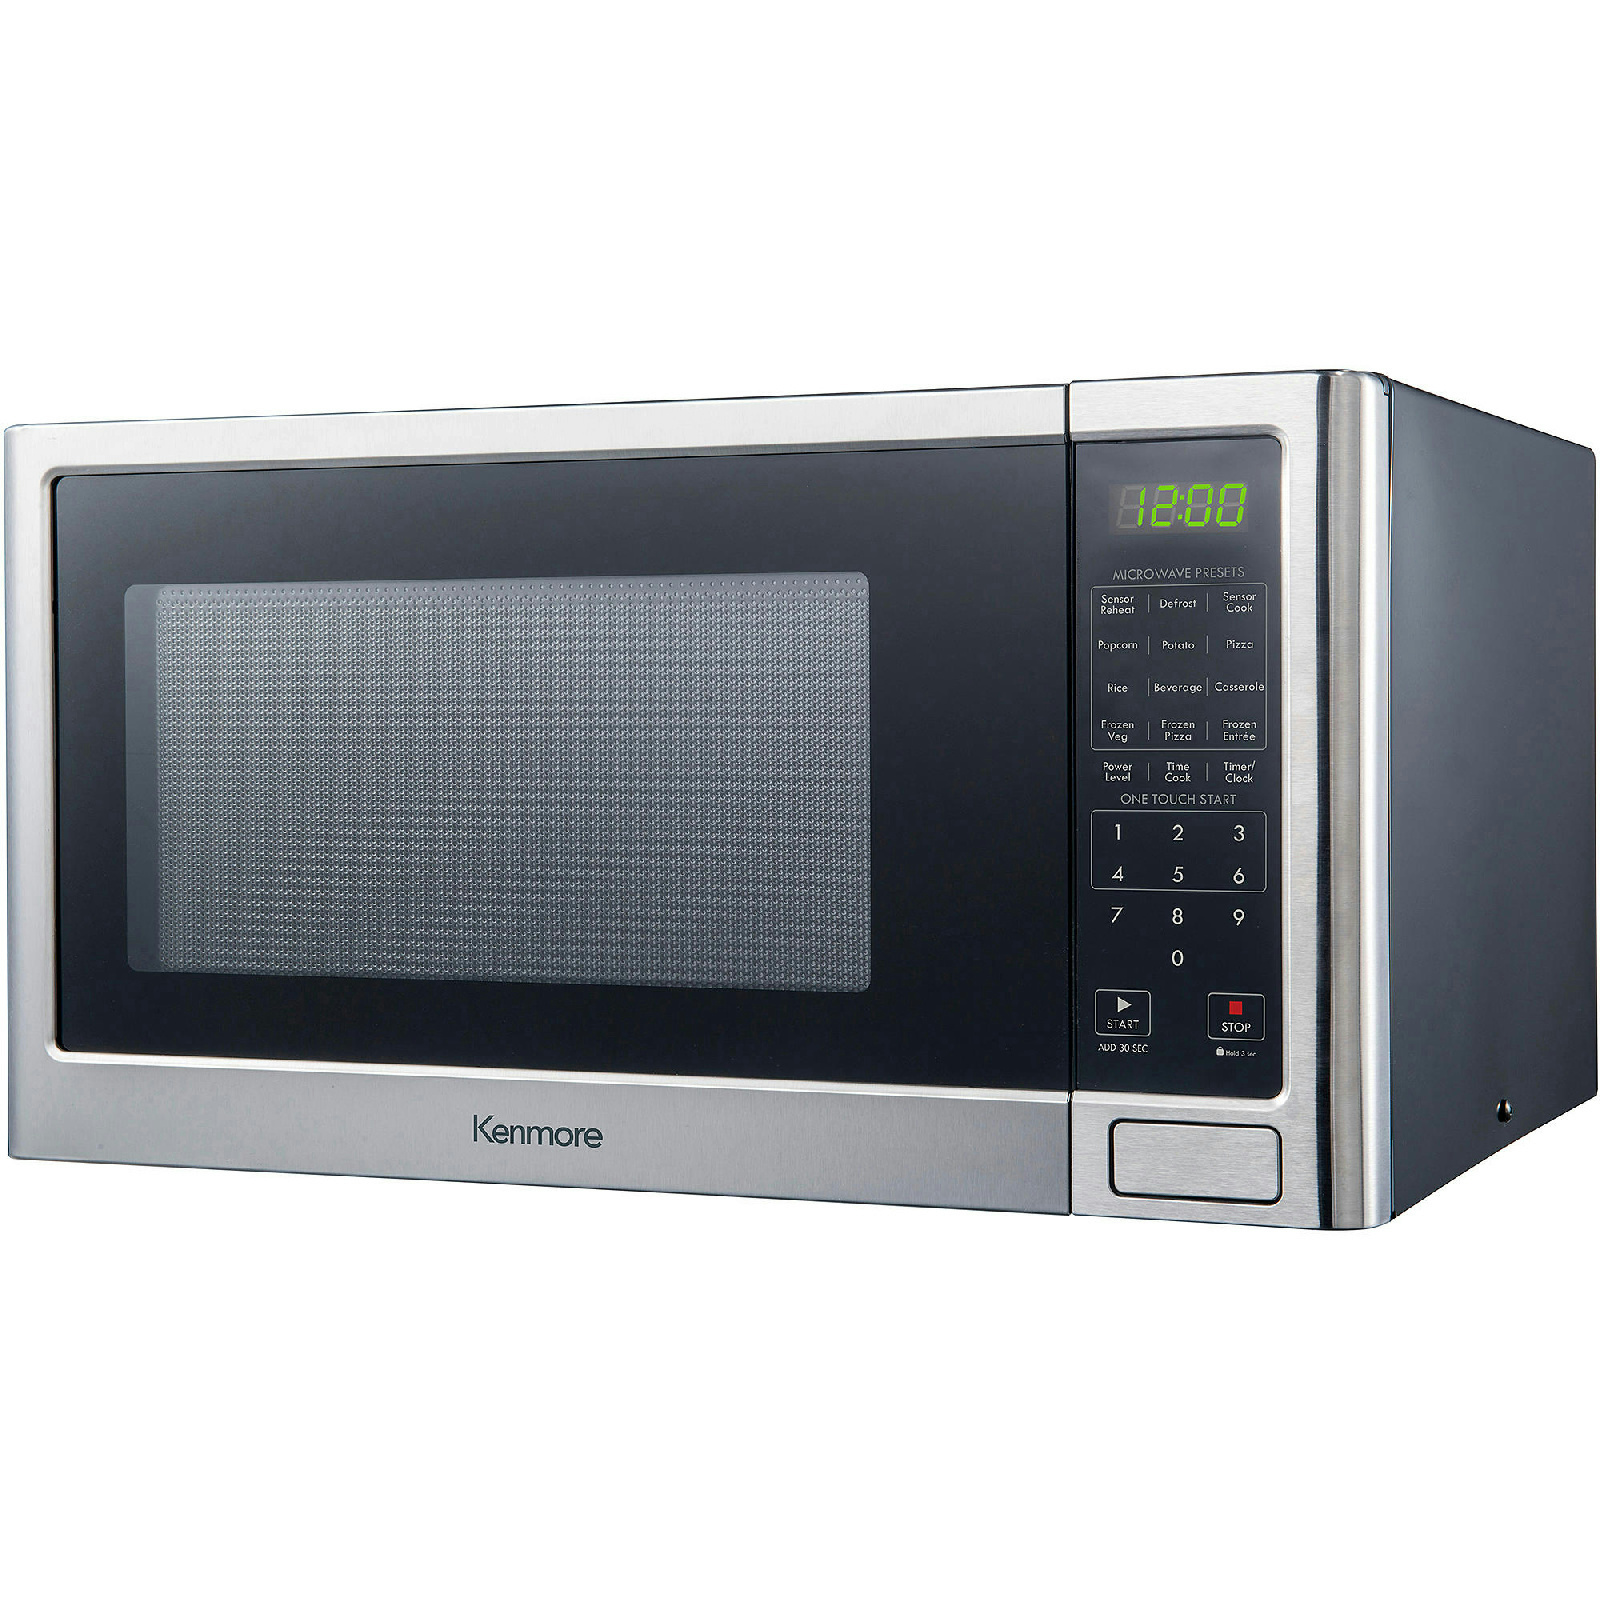 Kenmore 75653 1.2 cu.ft. Microwave Oven - Stainless Steel | eBay